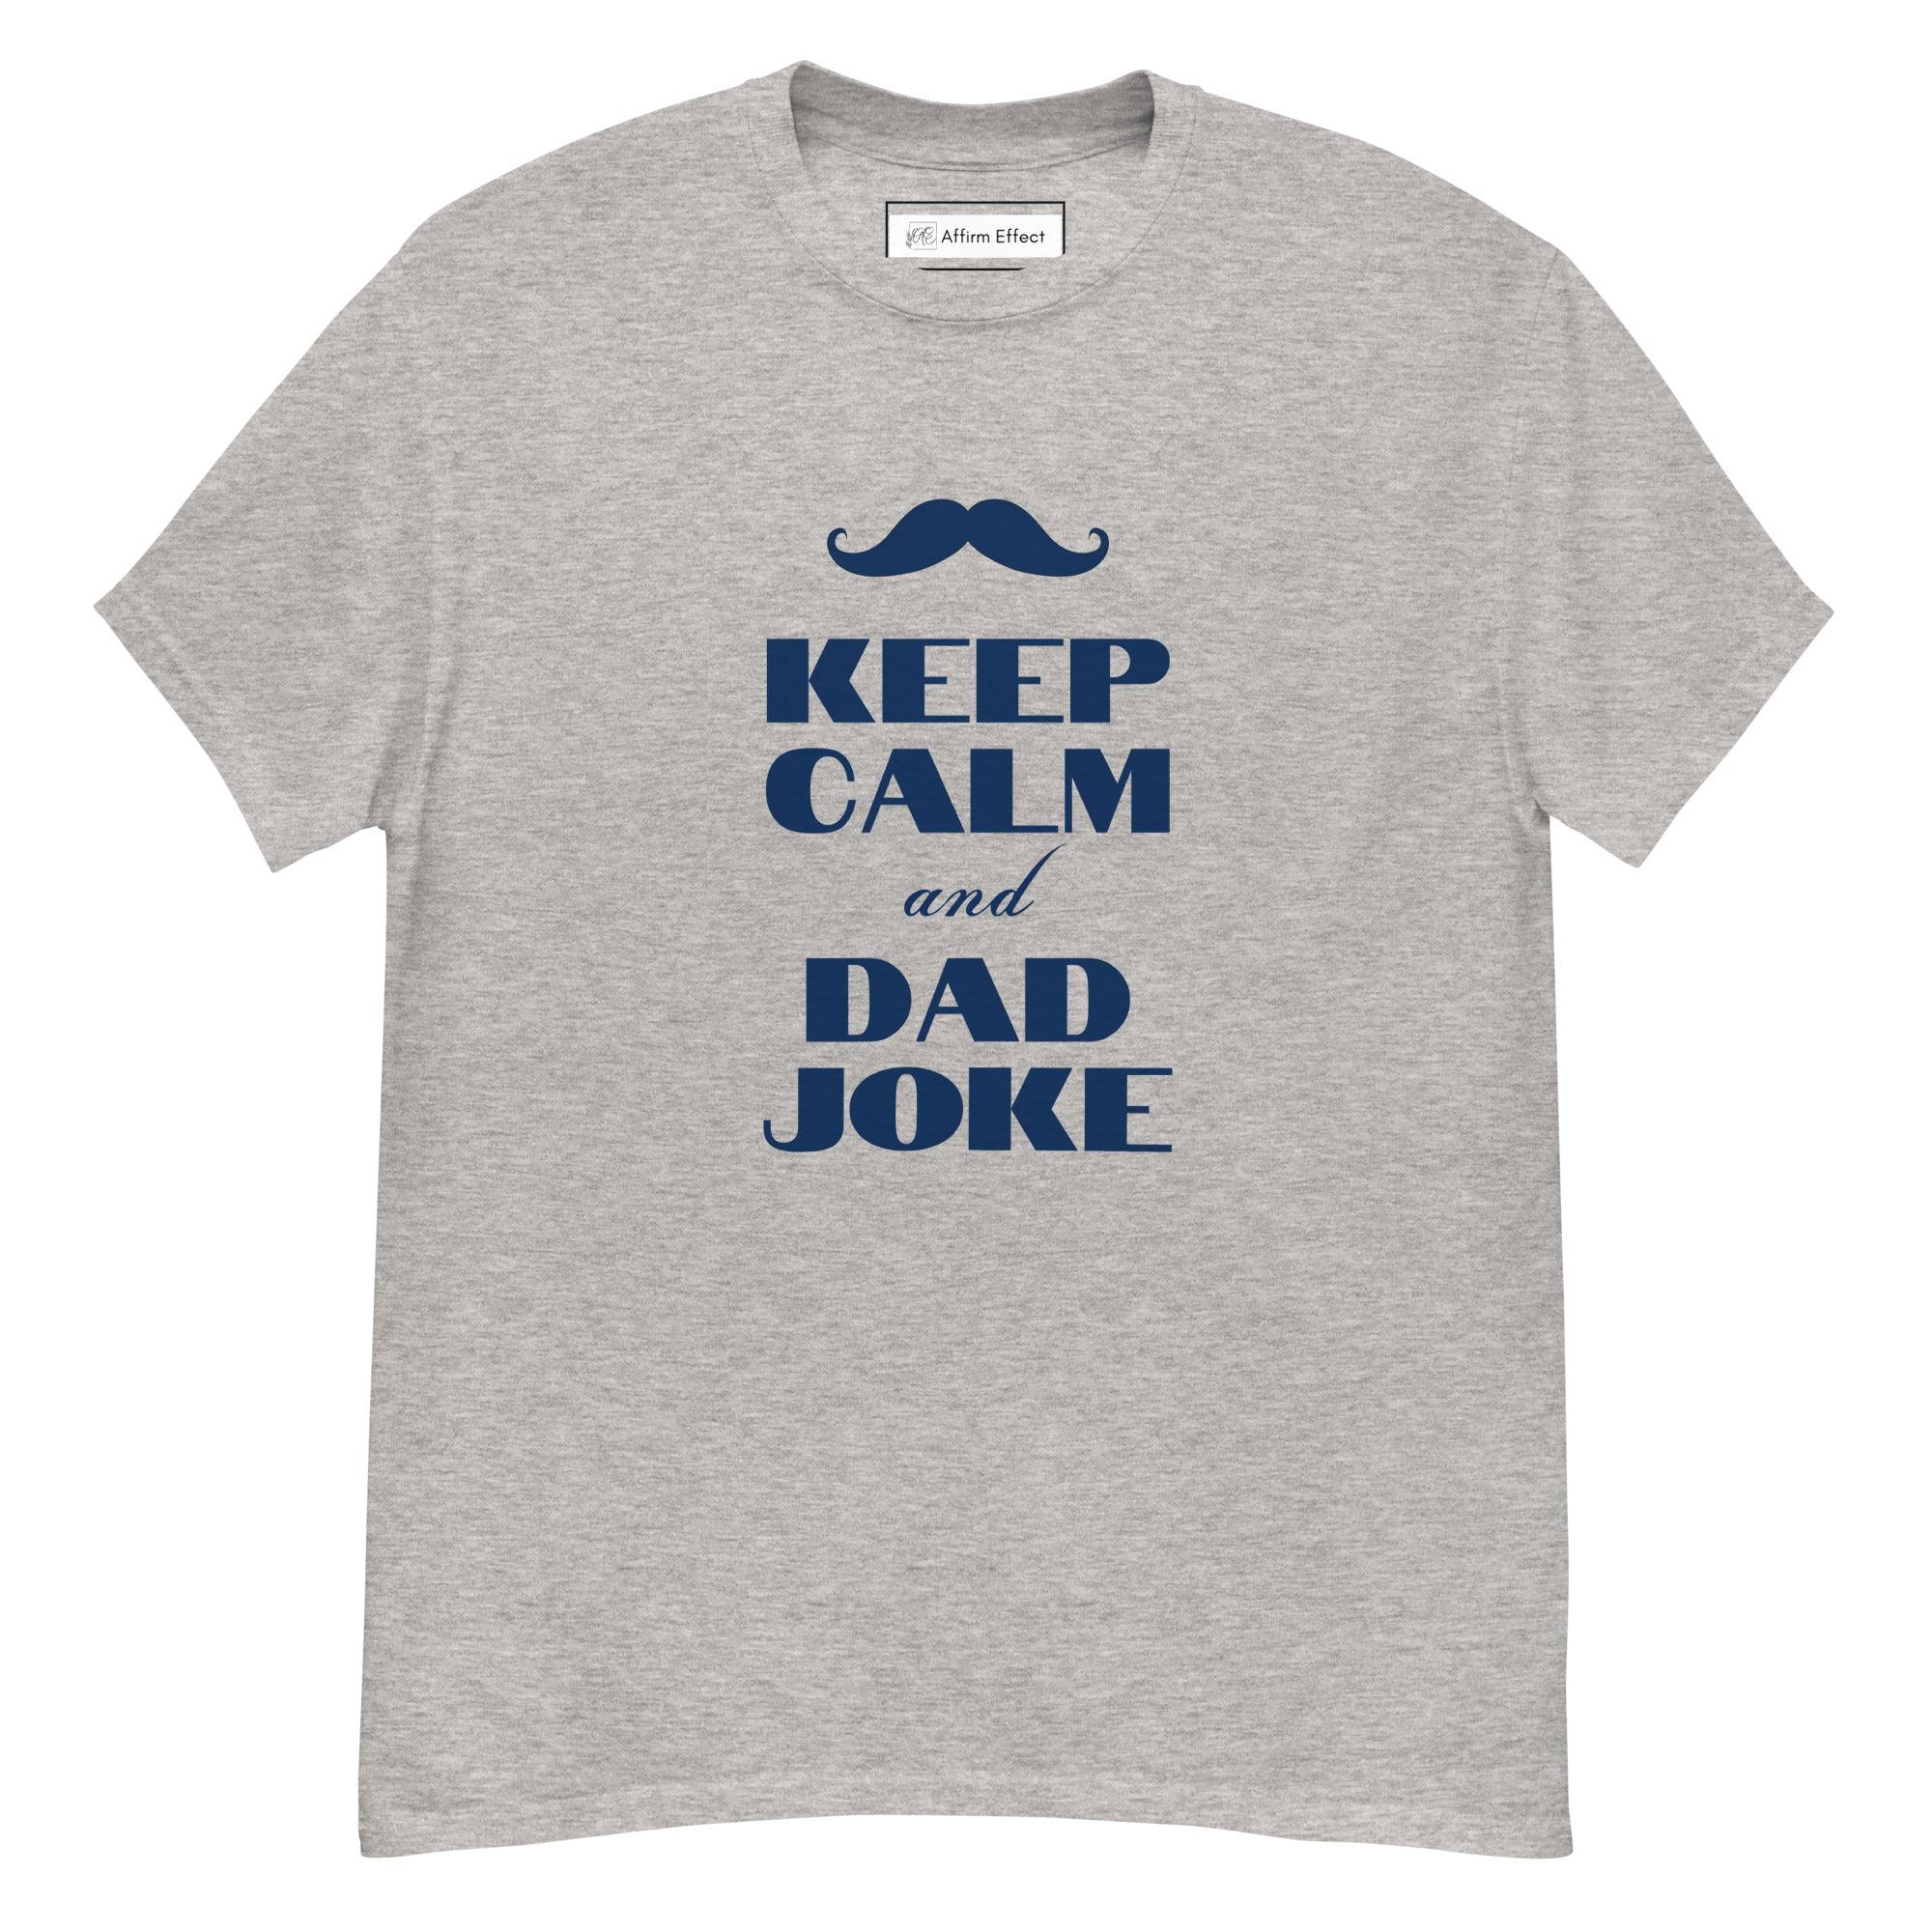 Keep Calm and Dad Joke, Premium Men's classic tee | Father's Day Tee - Affirm Effect